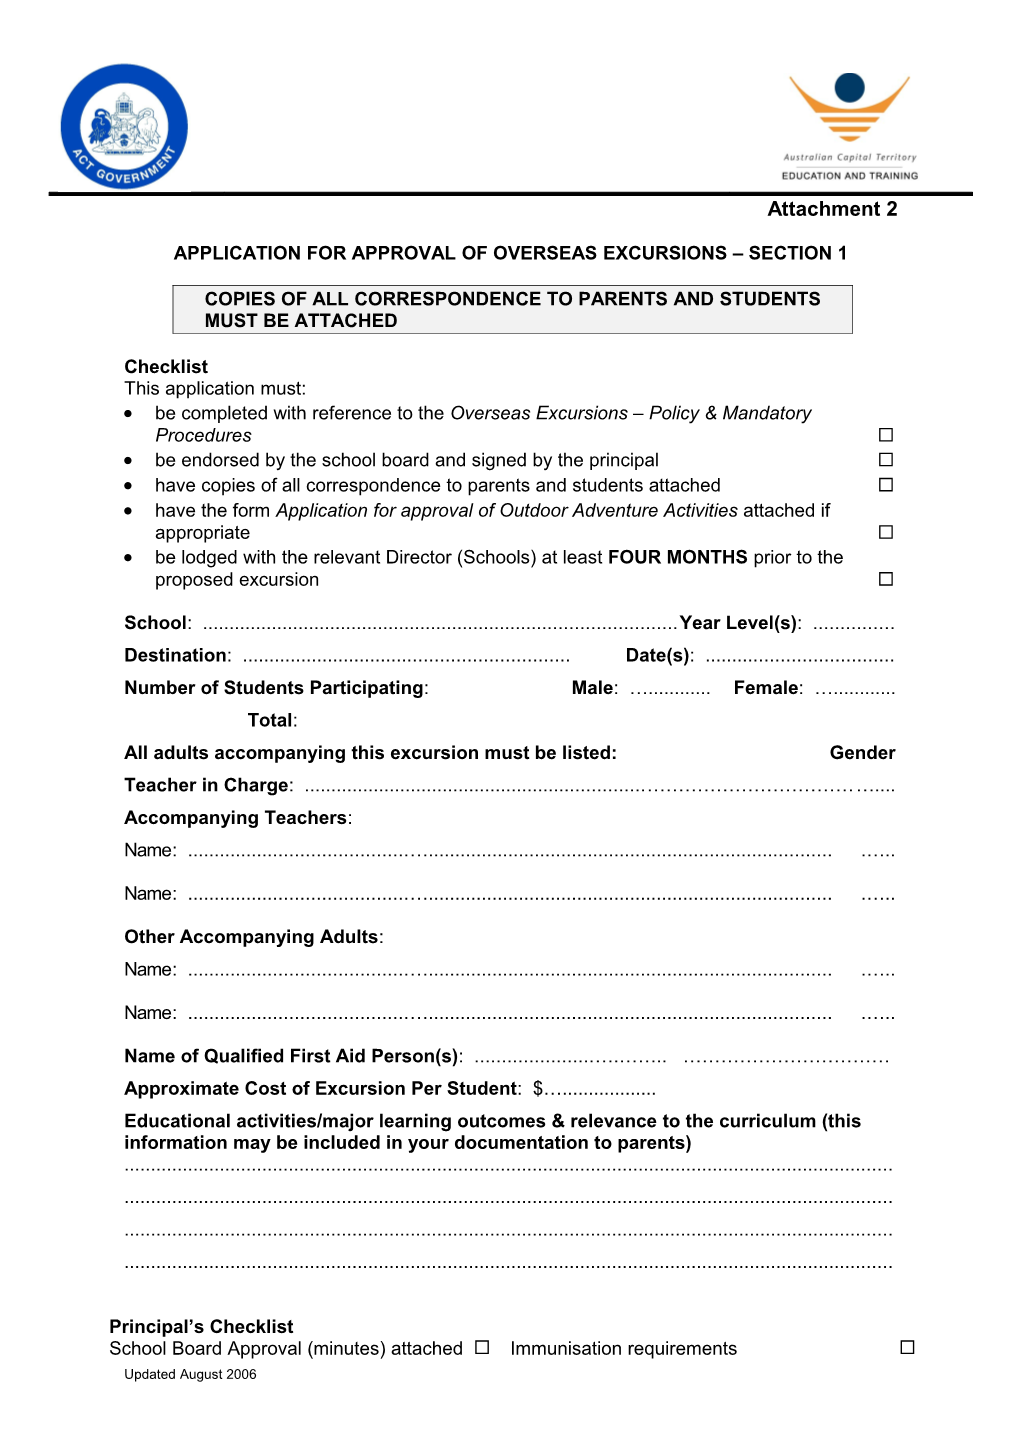 Application for Approval of Overseas Excursions - Section 1